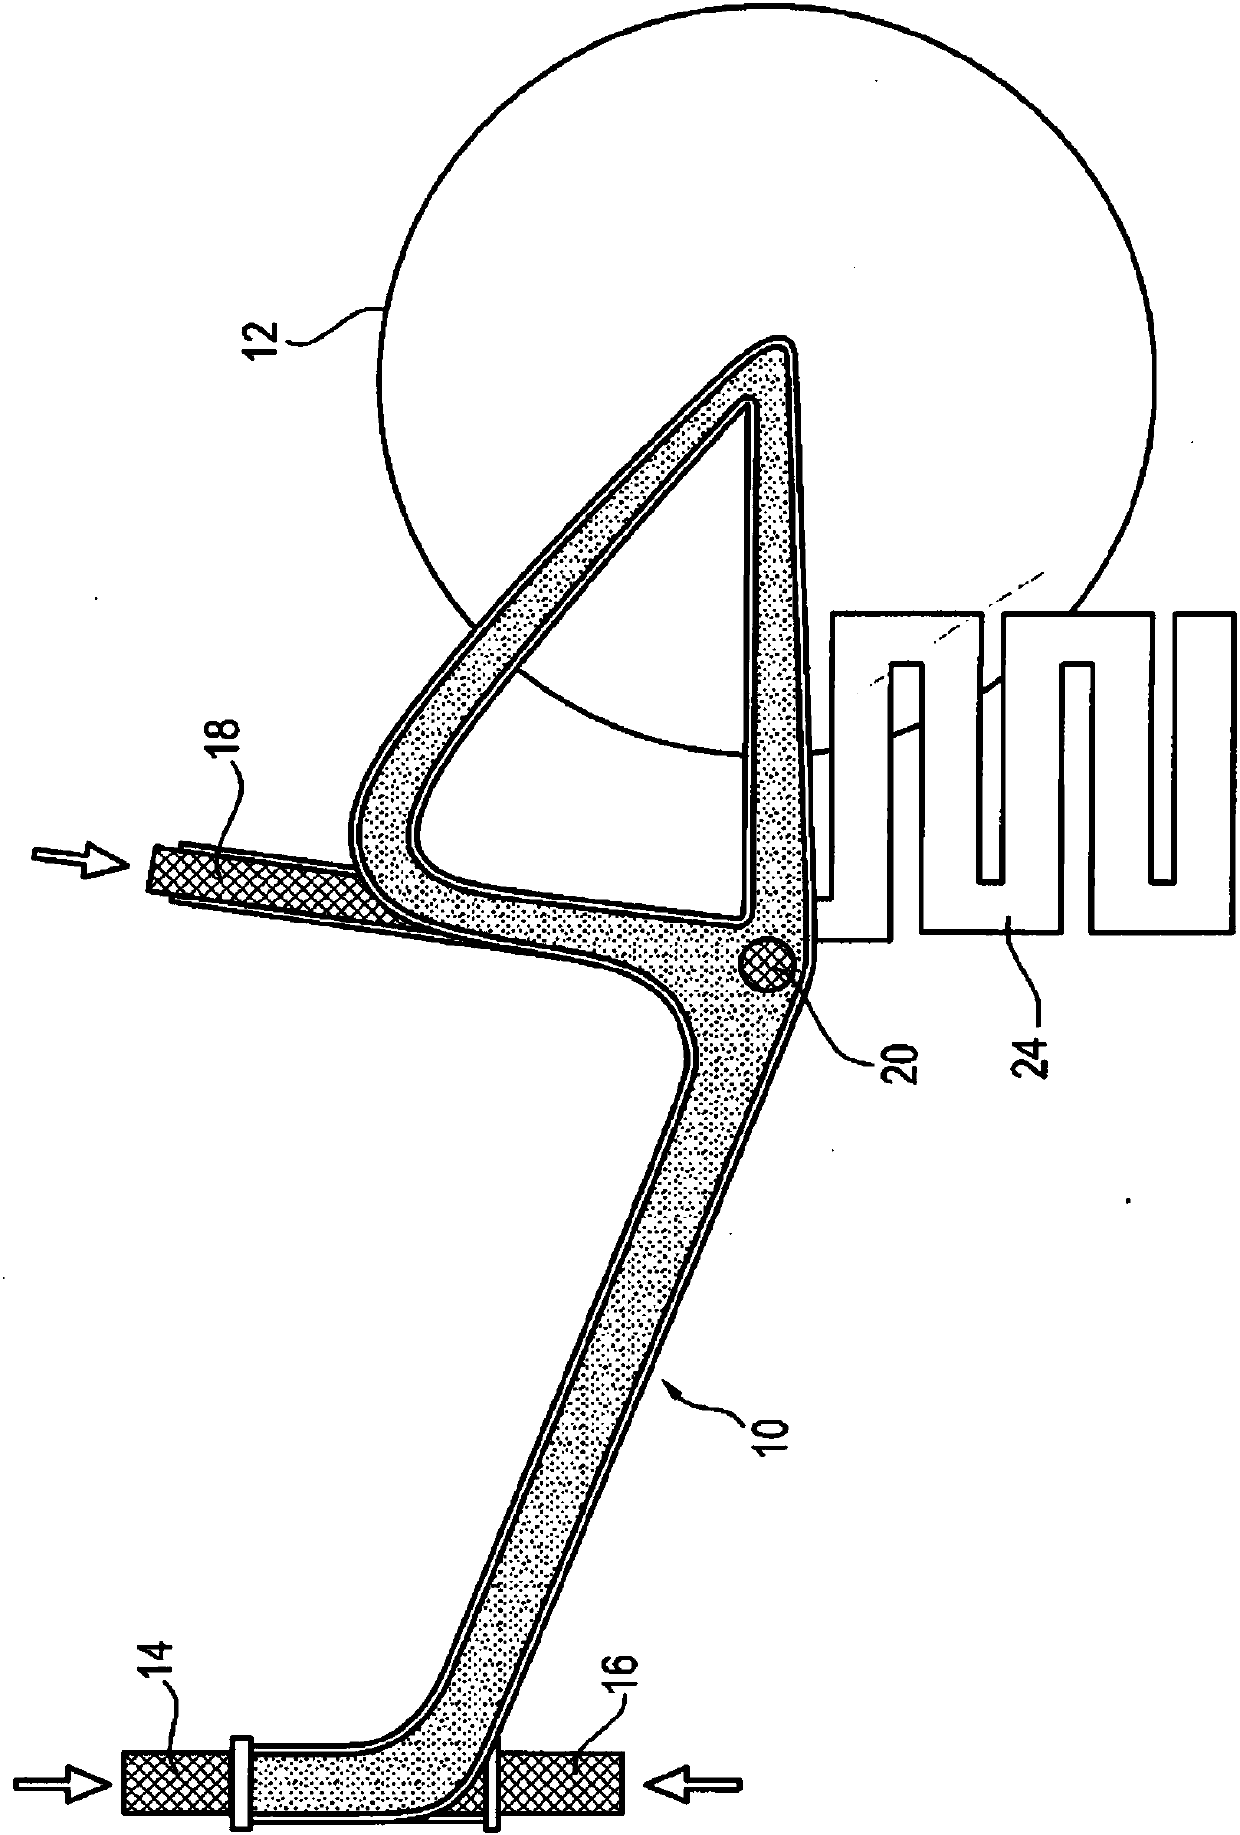 Method for producing a plastic frame for a two-wheeled vehicle